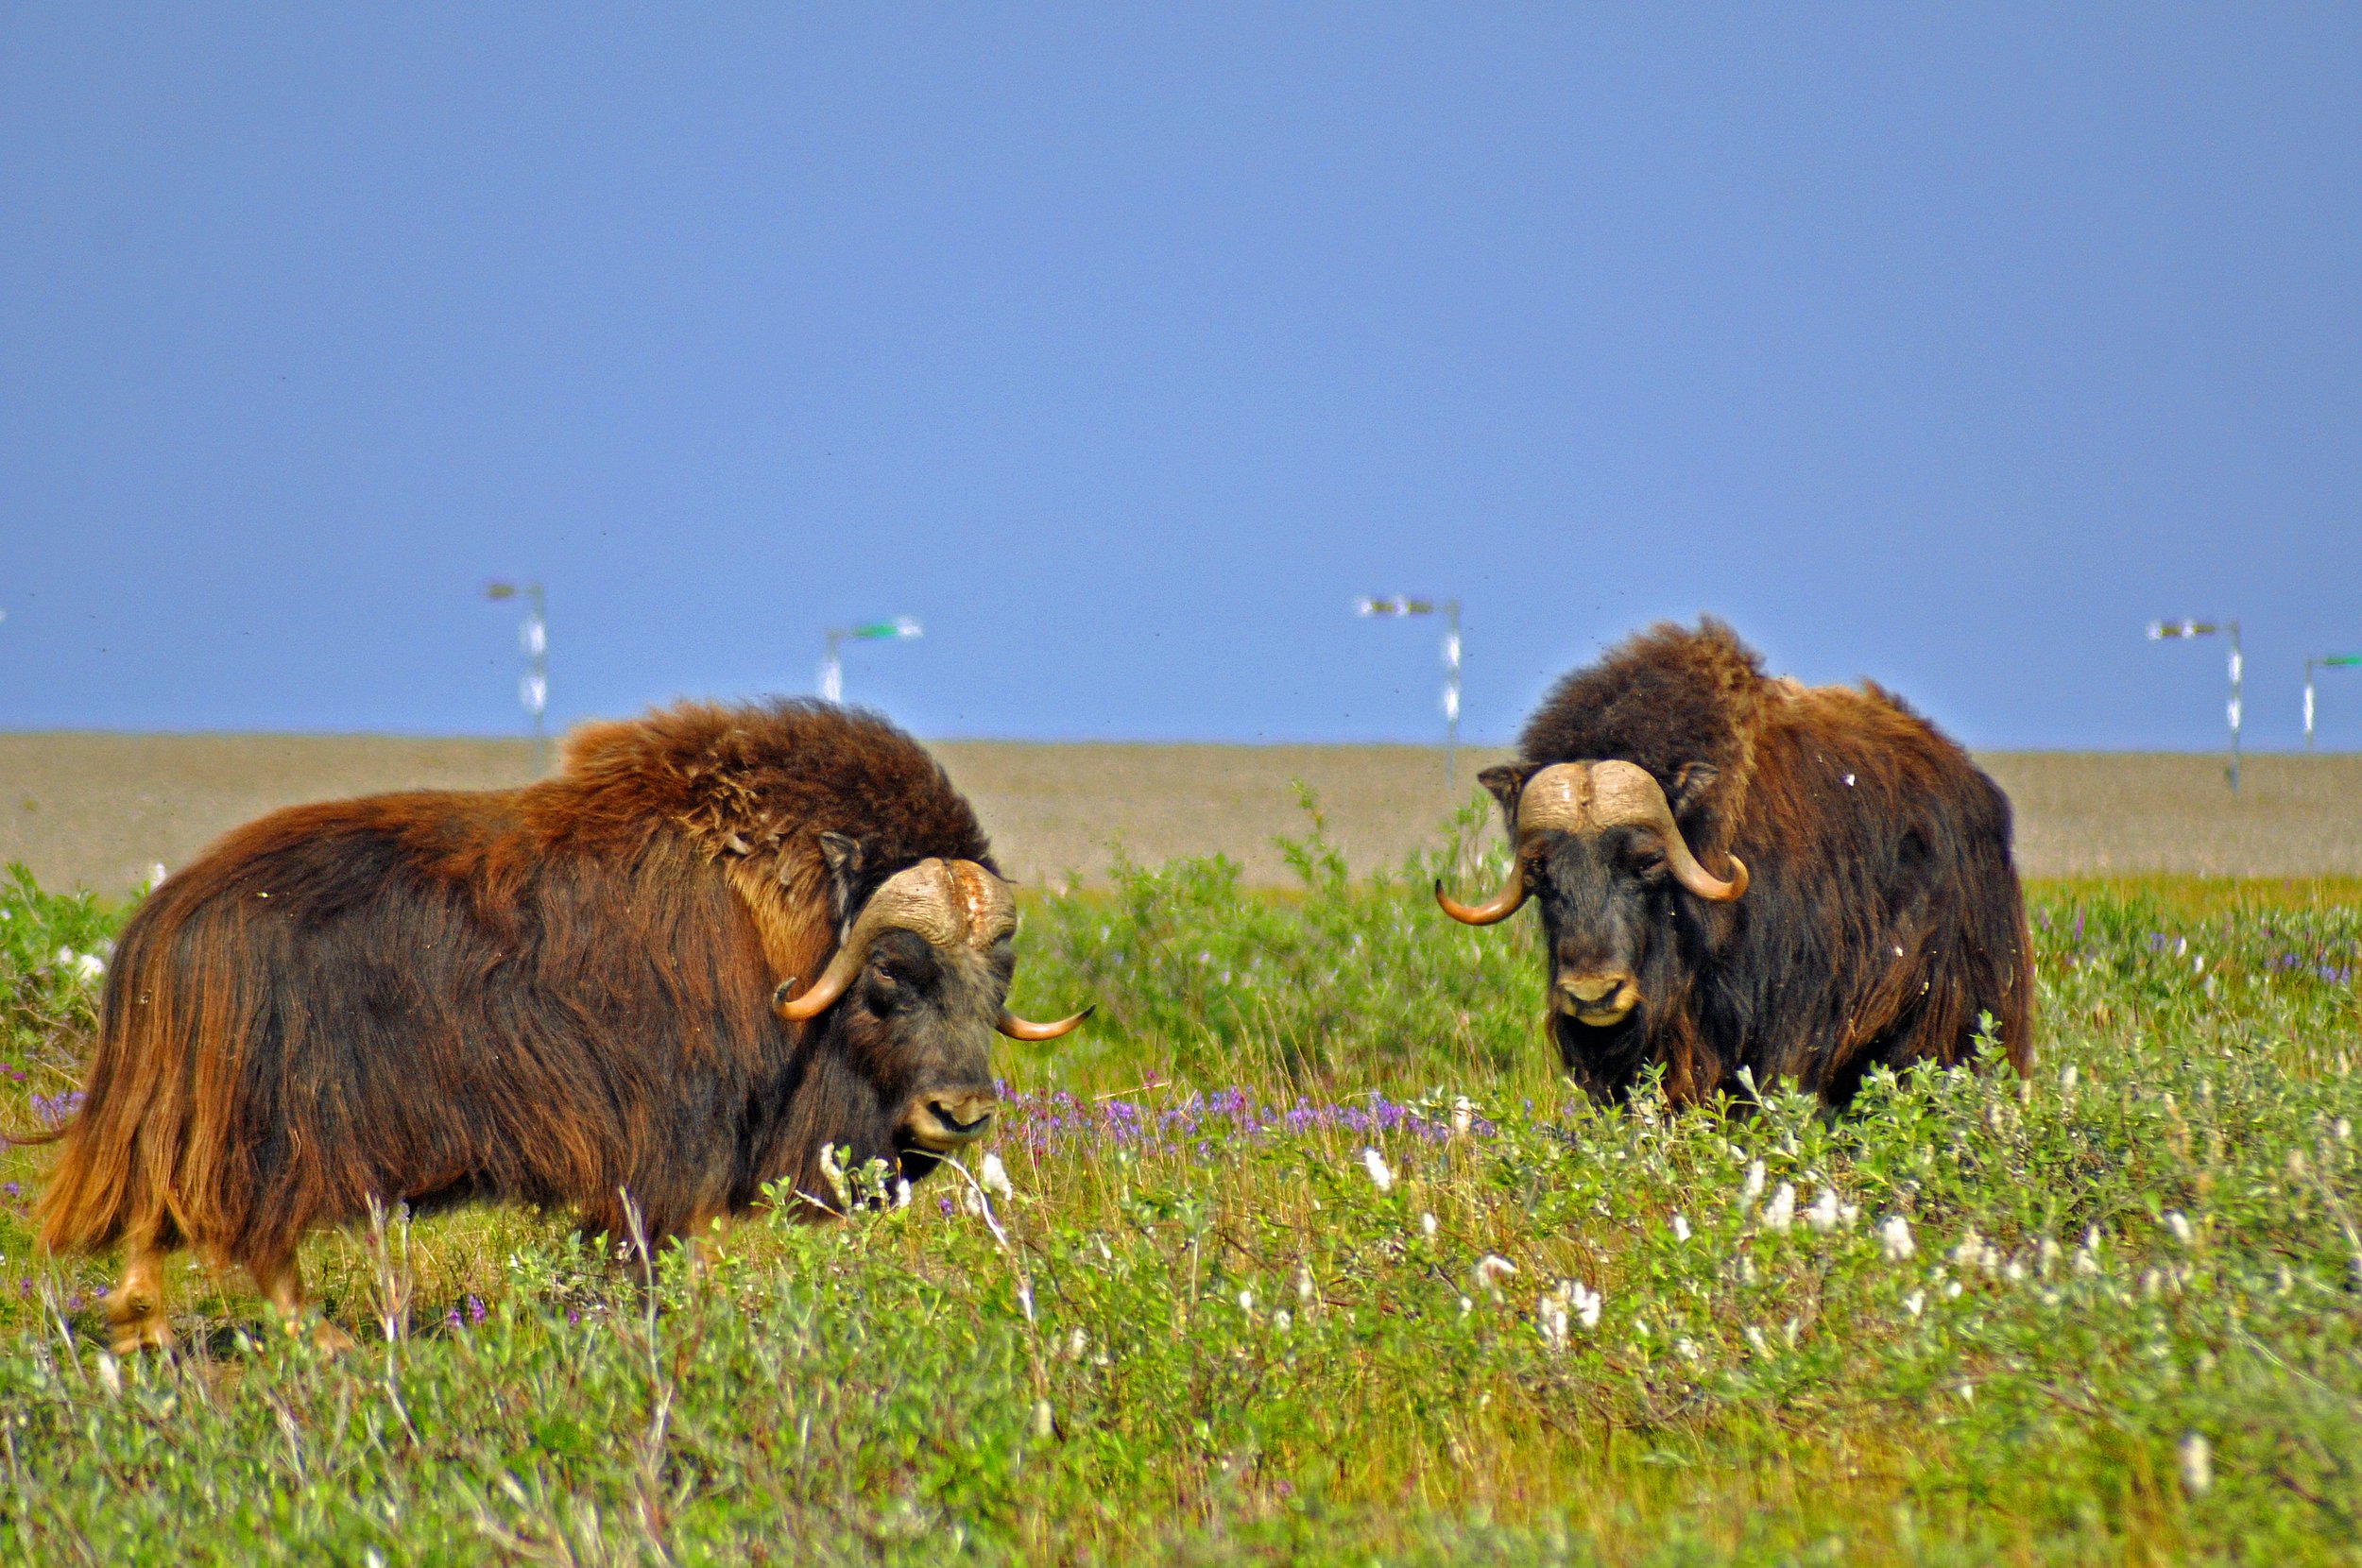  Just east of the Dalton Highway, Muskoxen roam the windy tundra of the North Slope near the Sagavanirktok River. They live naturally only in Canadian arctic tundra, Alaska, and Greenland. Members of the goat family, their underwool is eight times wa